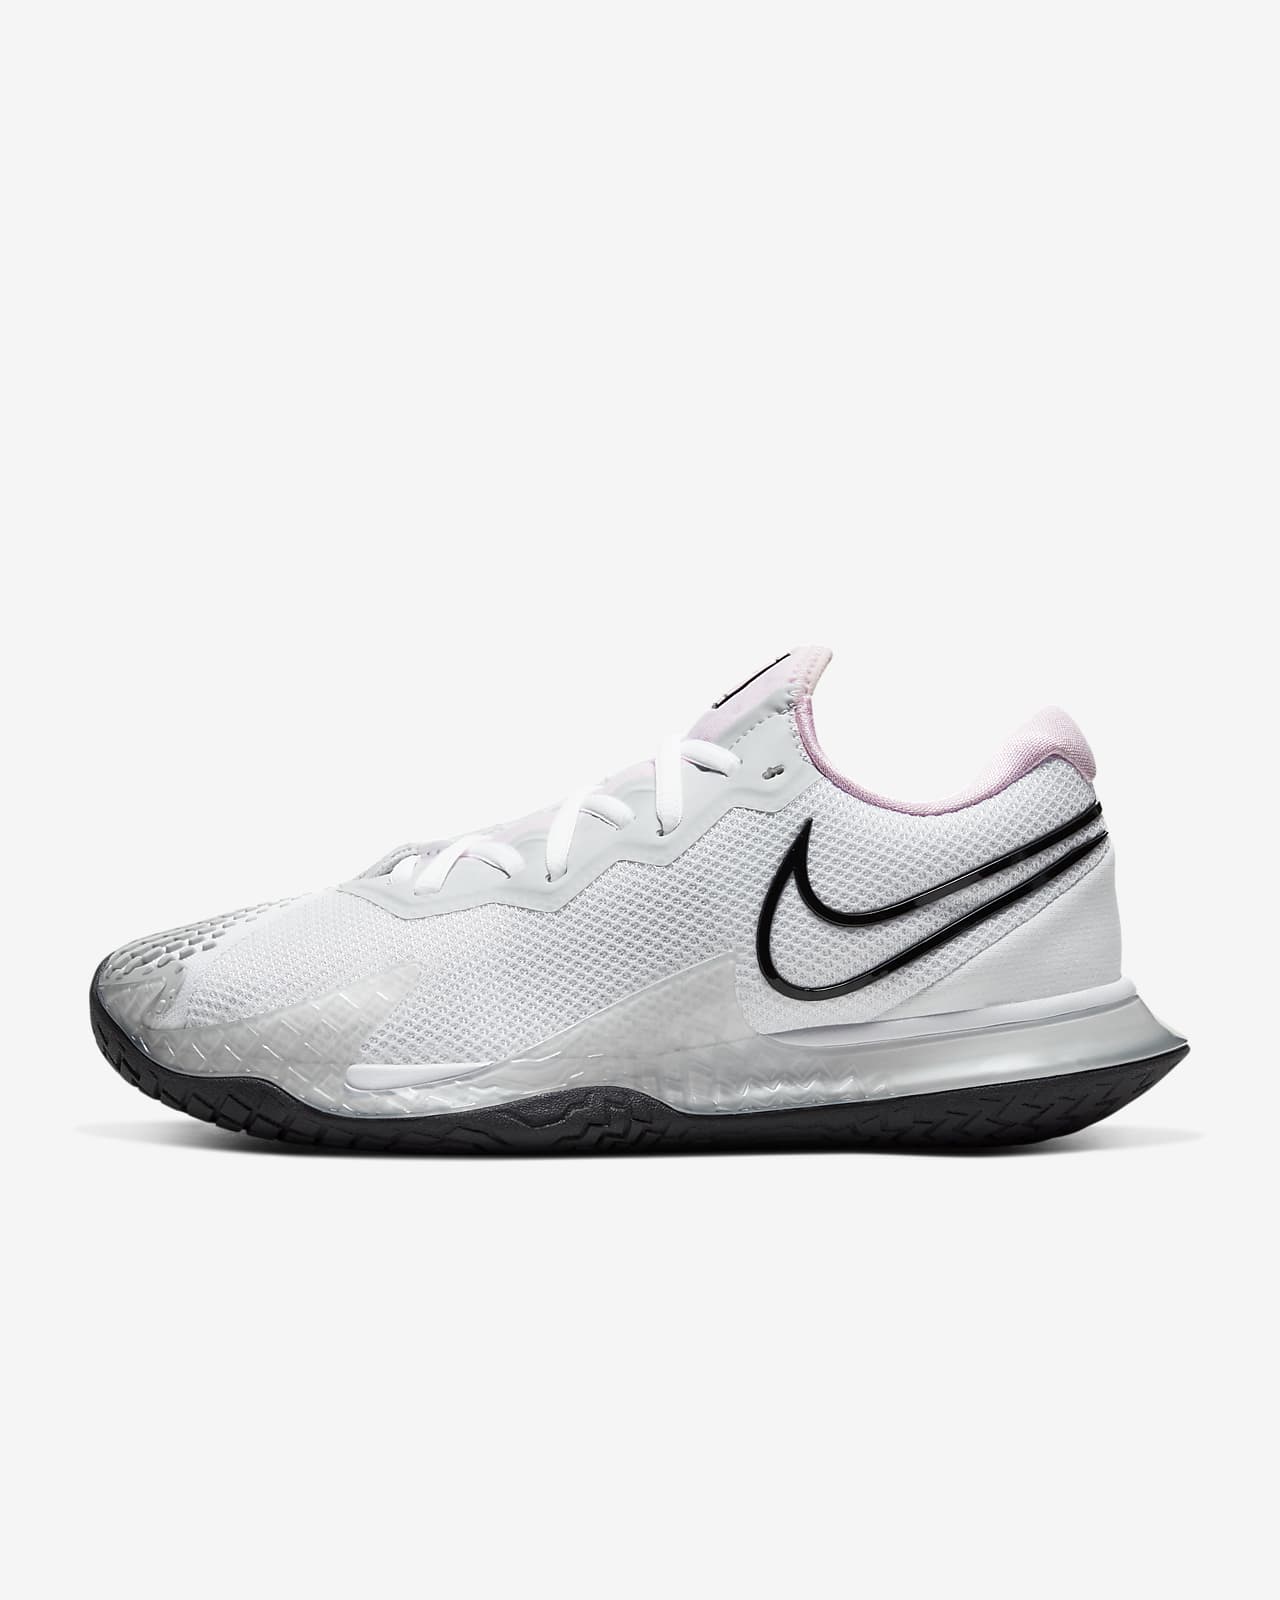 nike cage 4 tennis shoes